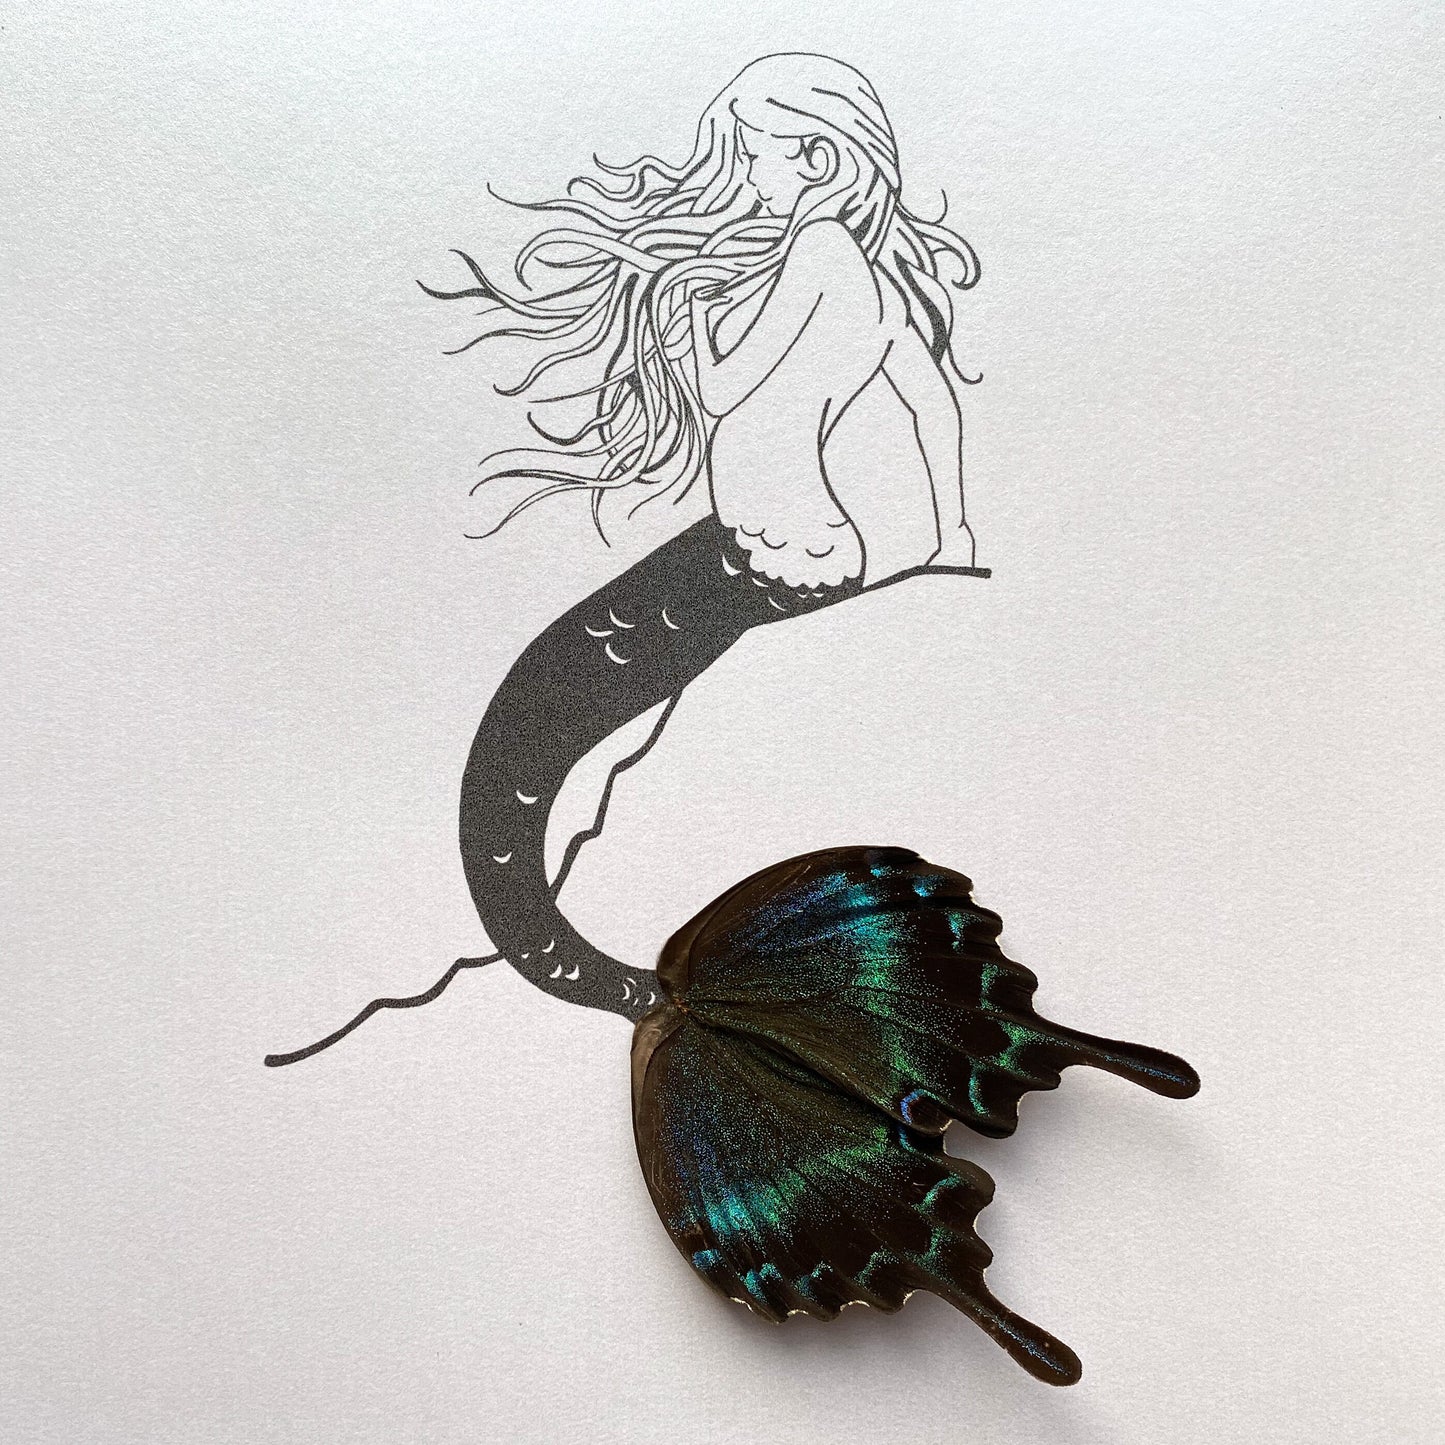 Mermaid Real Butterfly Wings Framed Art Ethically Sourced Made in MN USA - Holly Ulm - Isms Butterfly Conservation Art